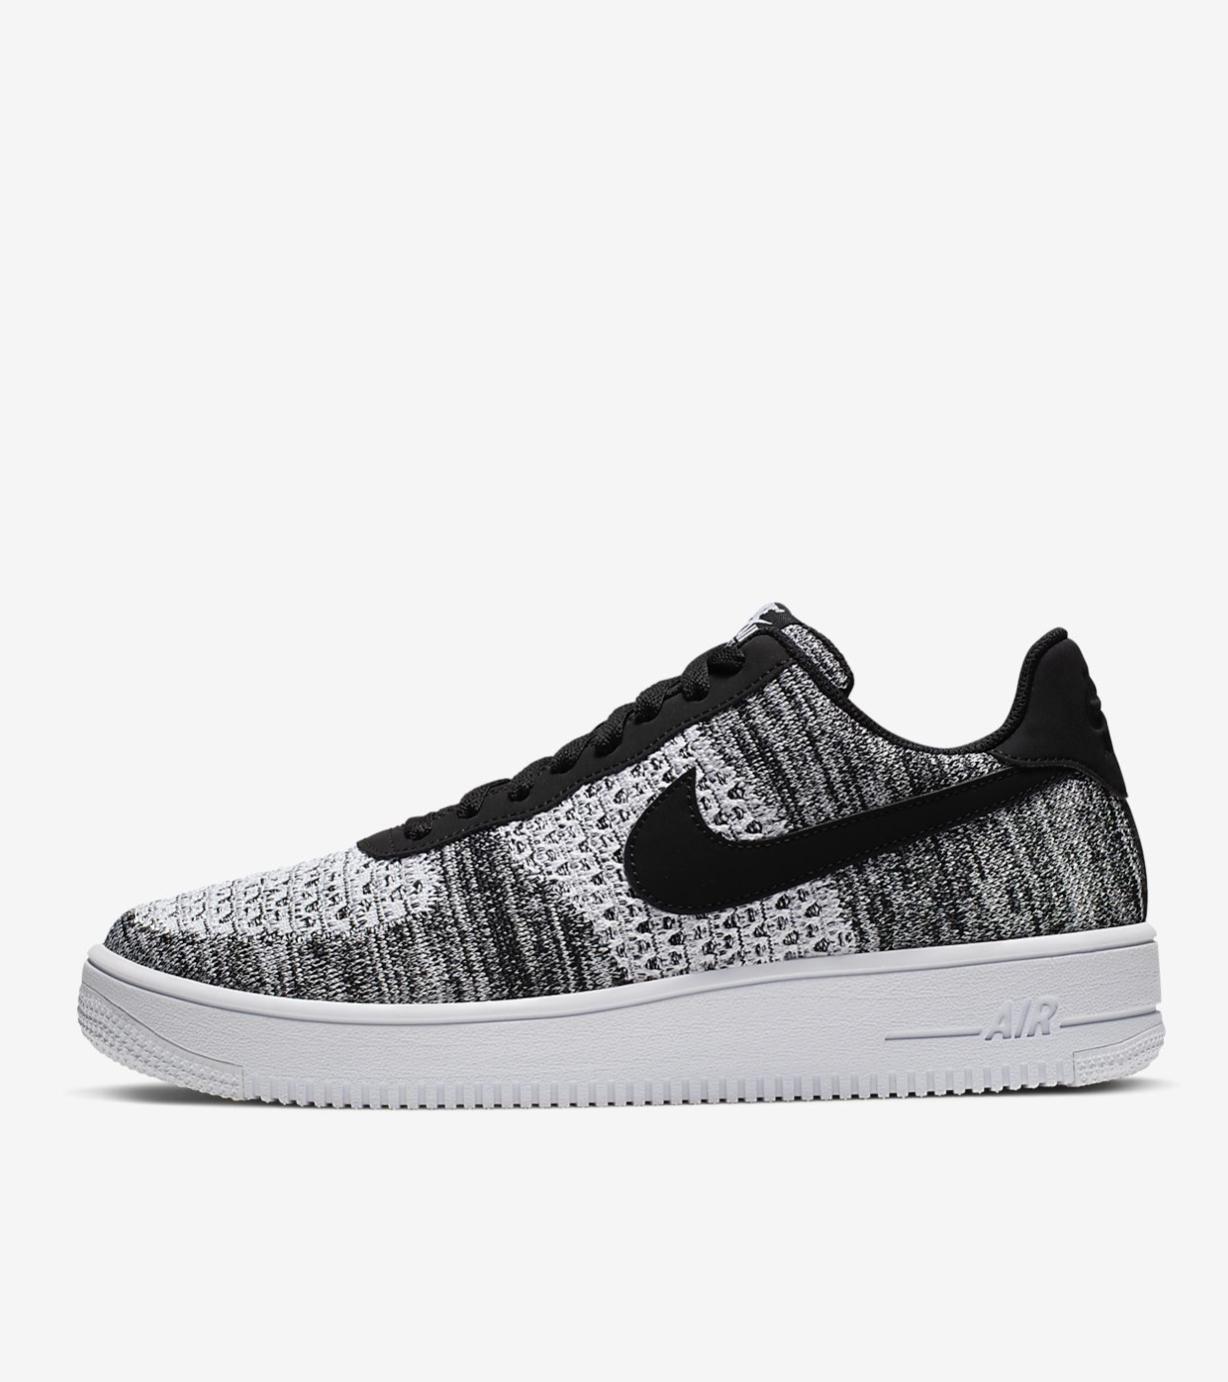 Inaccesible Muslo suspender Nike Air Force 1 Flyknit 2.0 80,00 € NIKE AIR FORCE 1